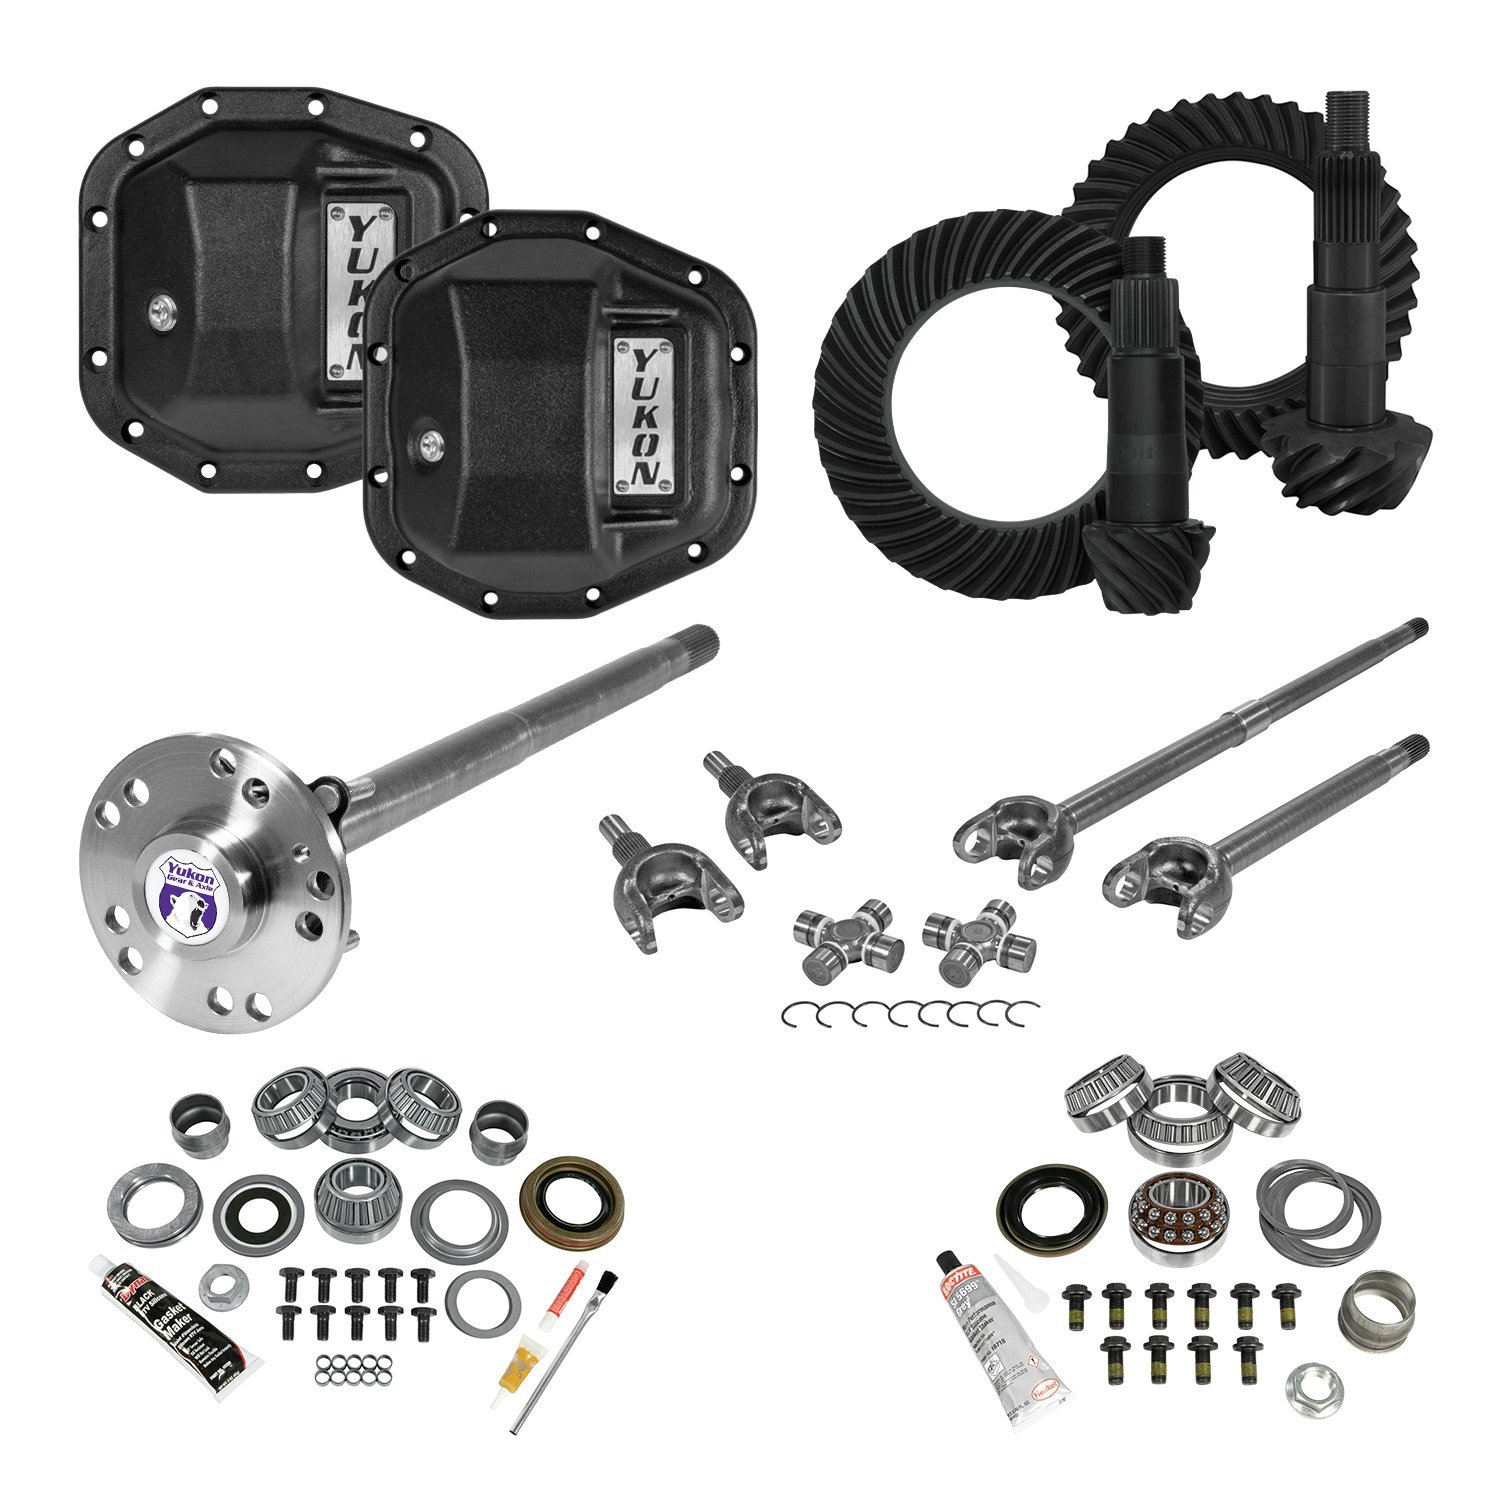 Stage 4 Jeep Re-Gear Kit W/Covers, Fr & Rr Axles, Dana 30/44, 5.13 Ratio